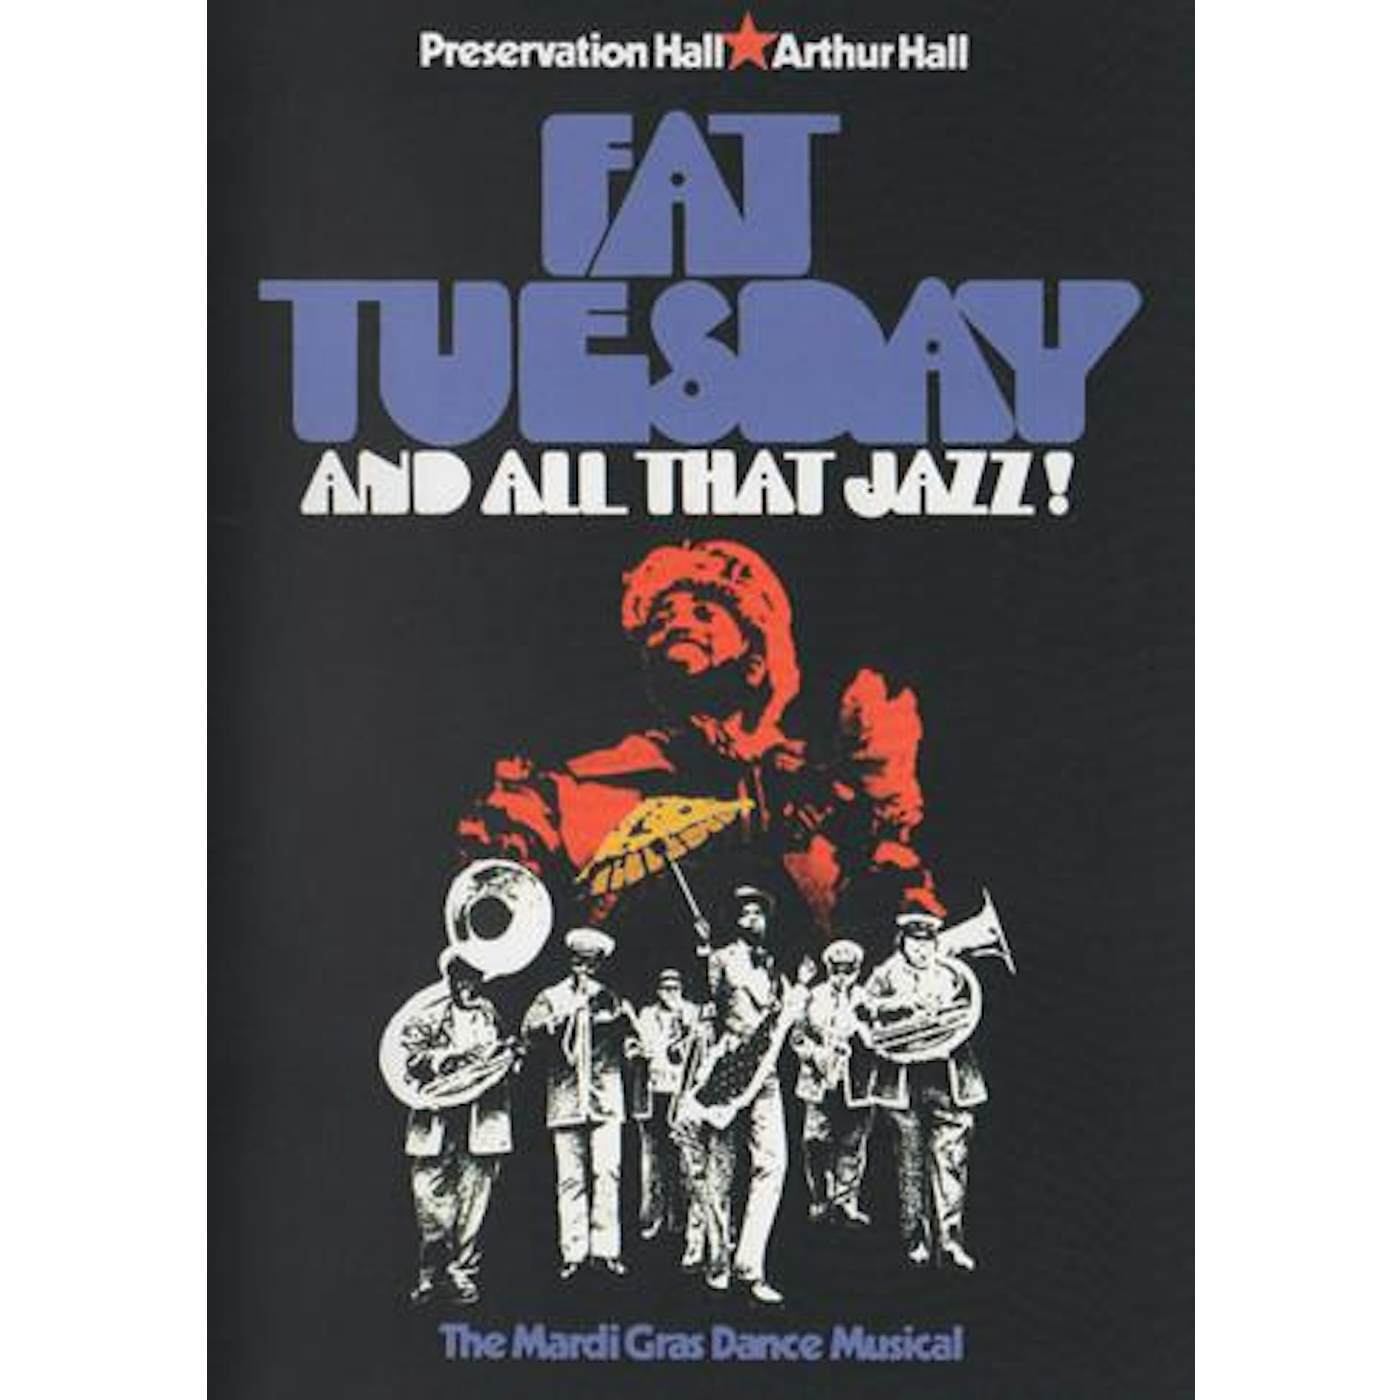 Preservation Hall Jazz Band Fat Tuesday All That Jazz: The Mardi Gras Dance Musical DVD